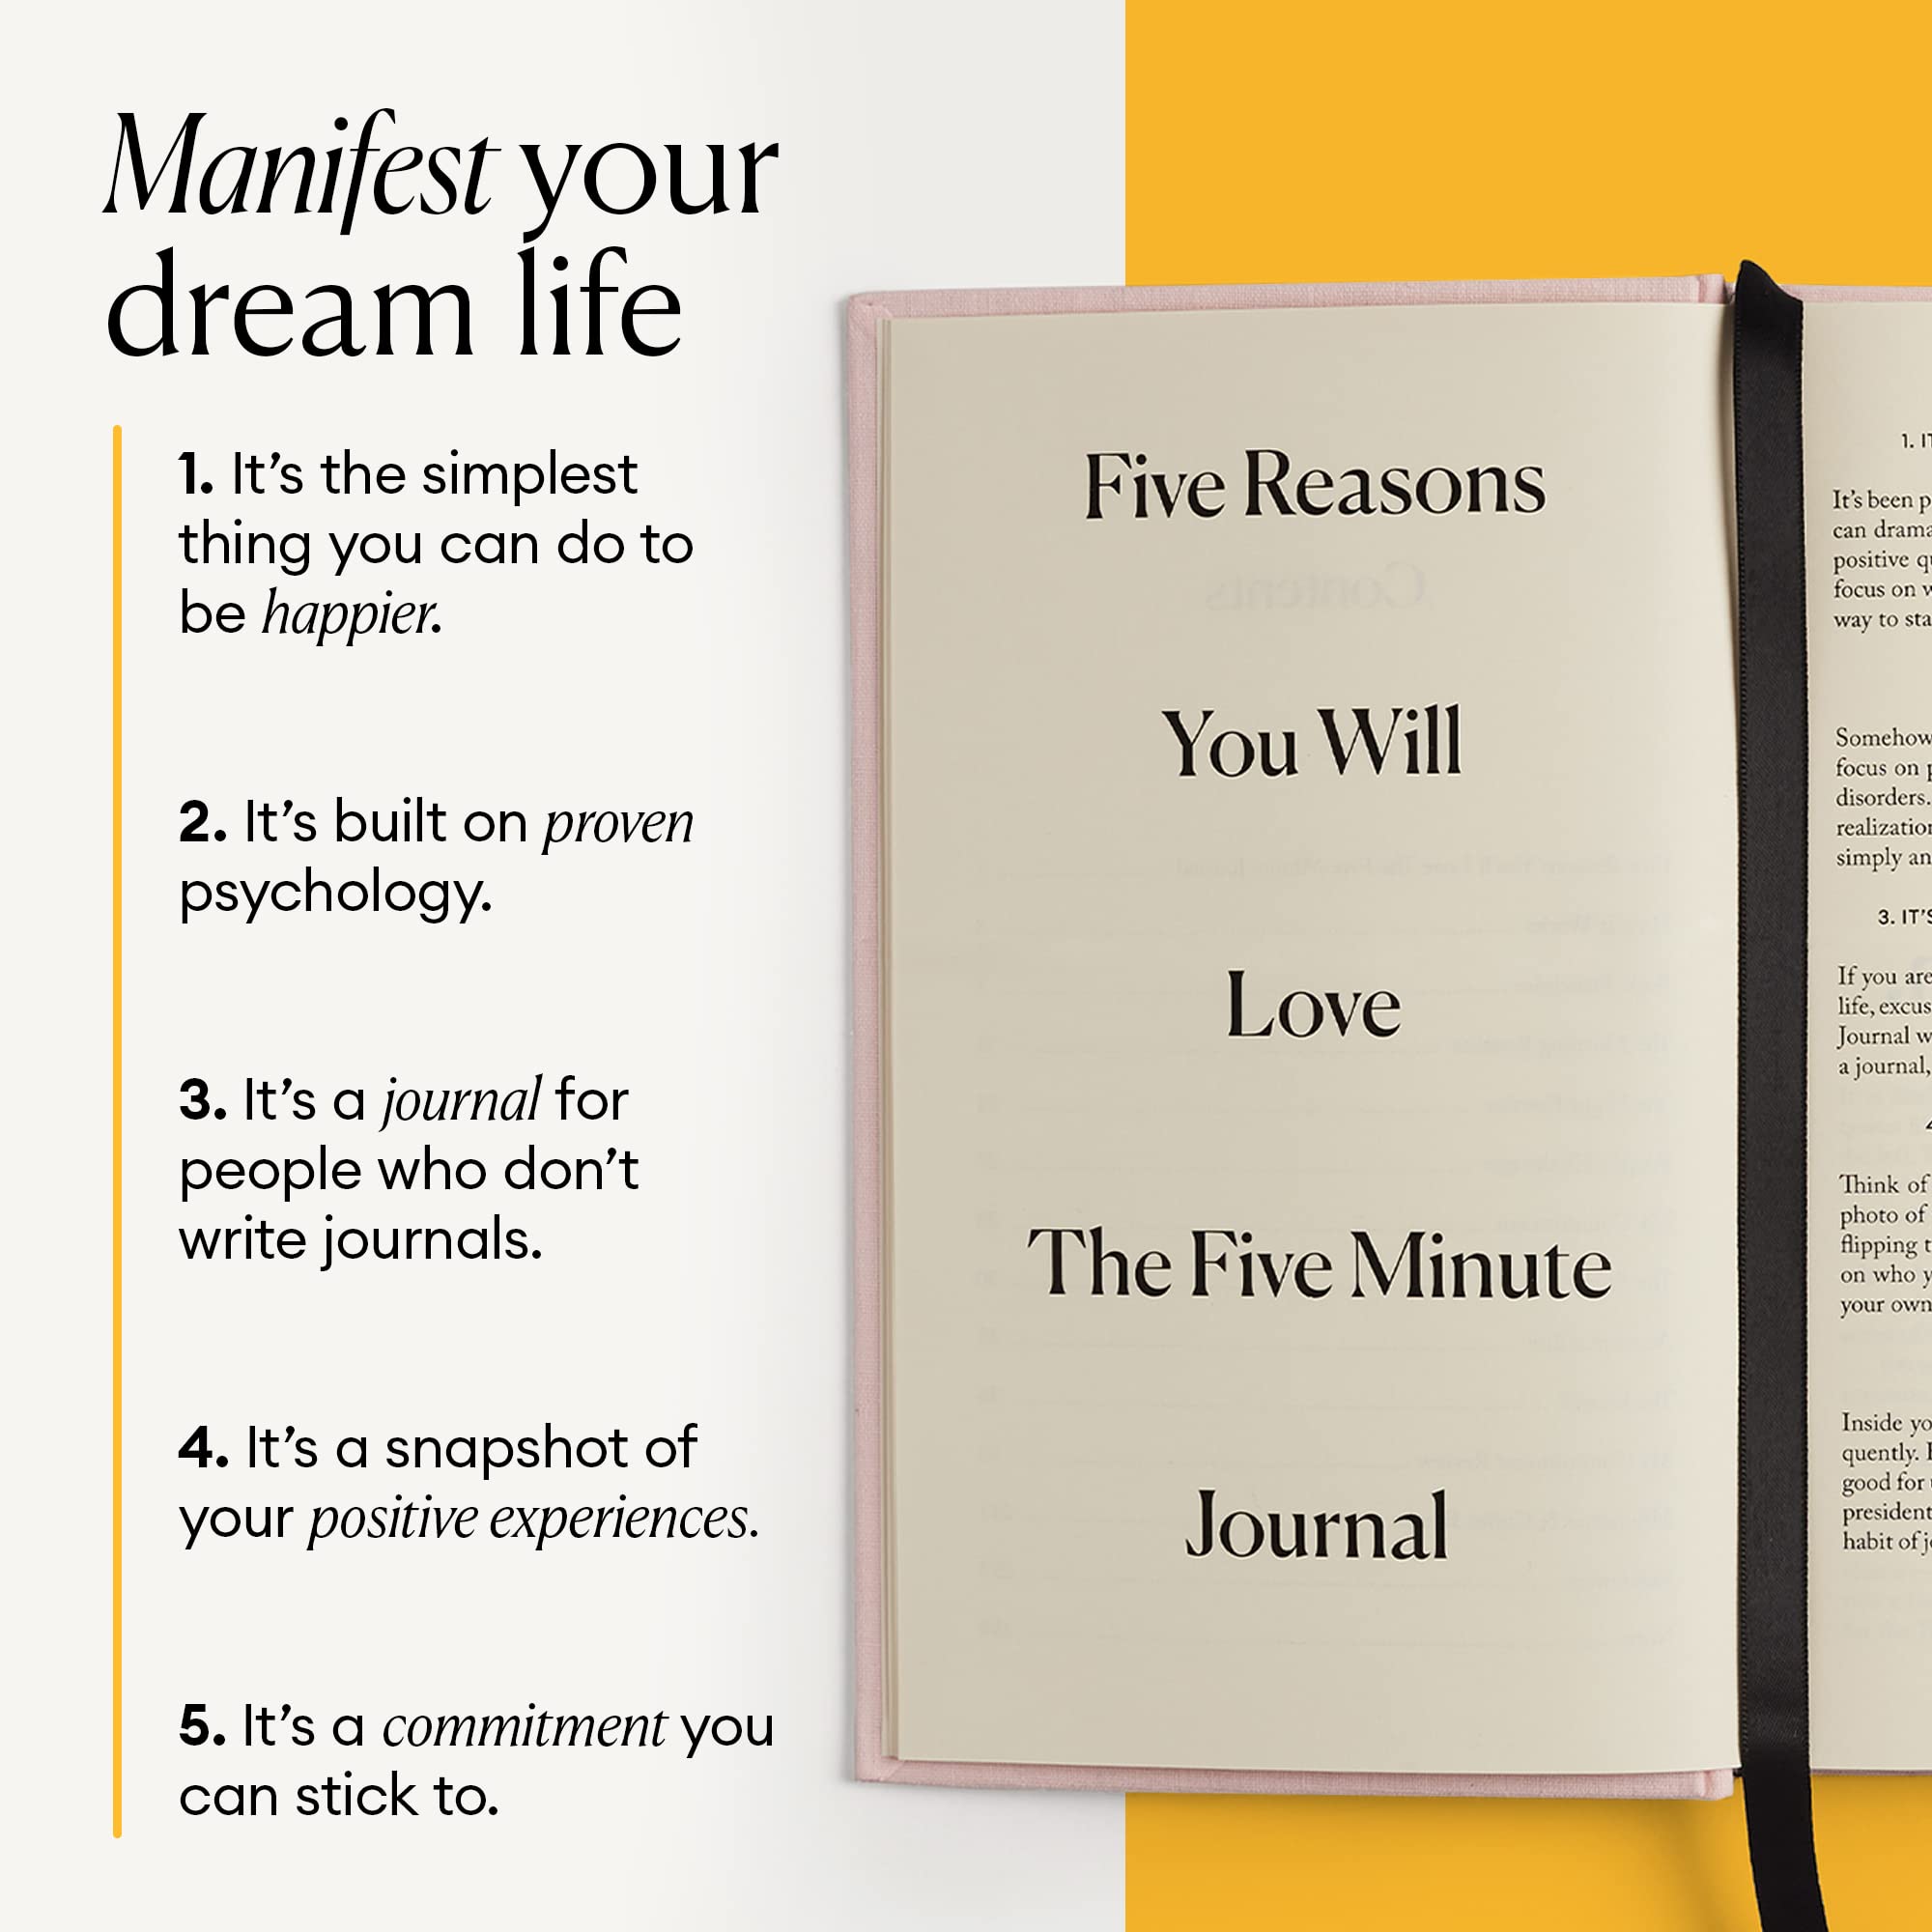 Intelligent Change: The Five Minute Journal - Daily Gratitude Journal for Happiness, Mindfulness, and Reflection - Undated Life Planner